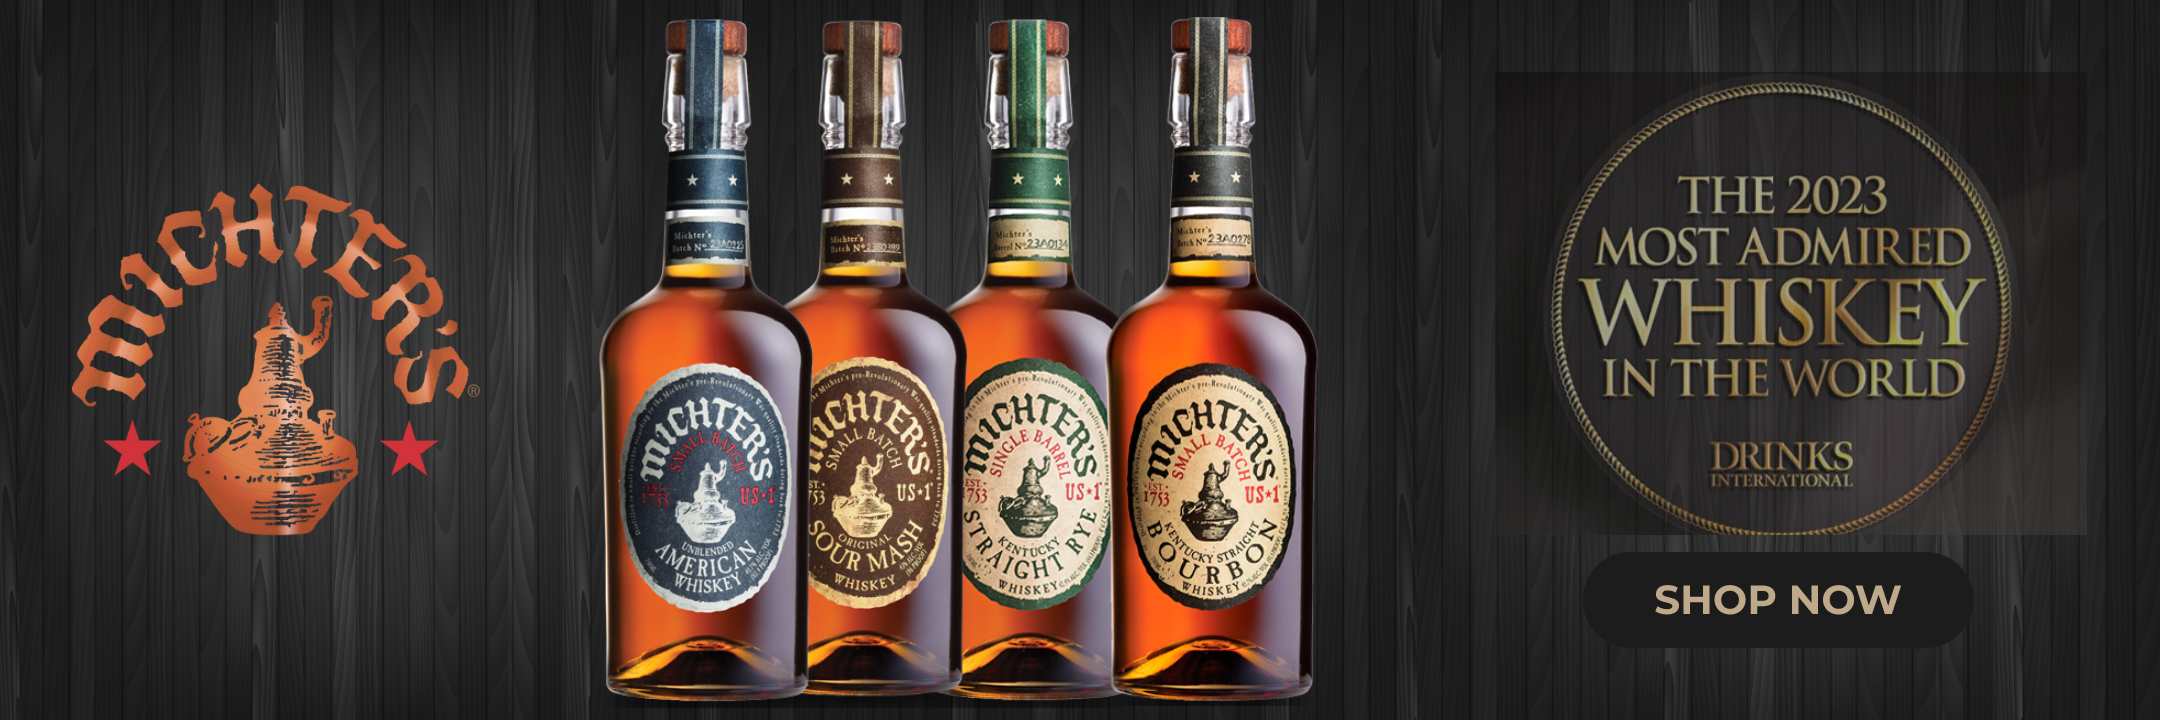 Michter's Whiskey Banner - The most admired whiskey in the world